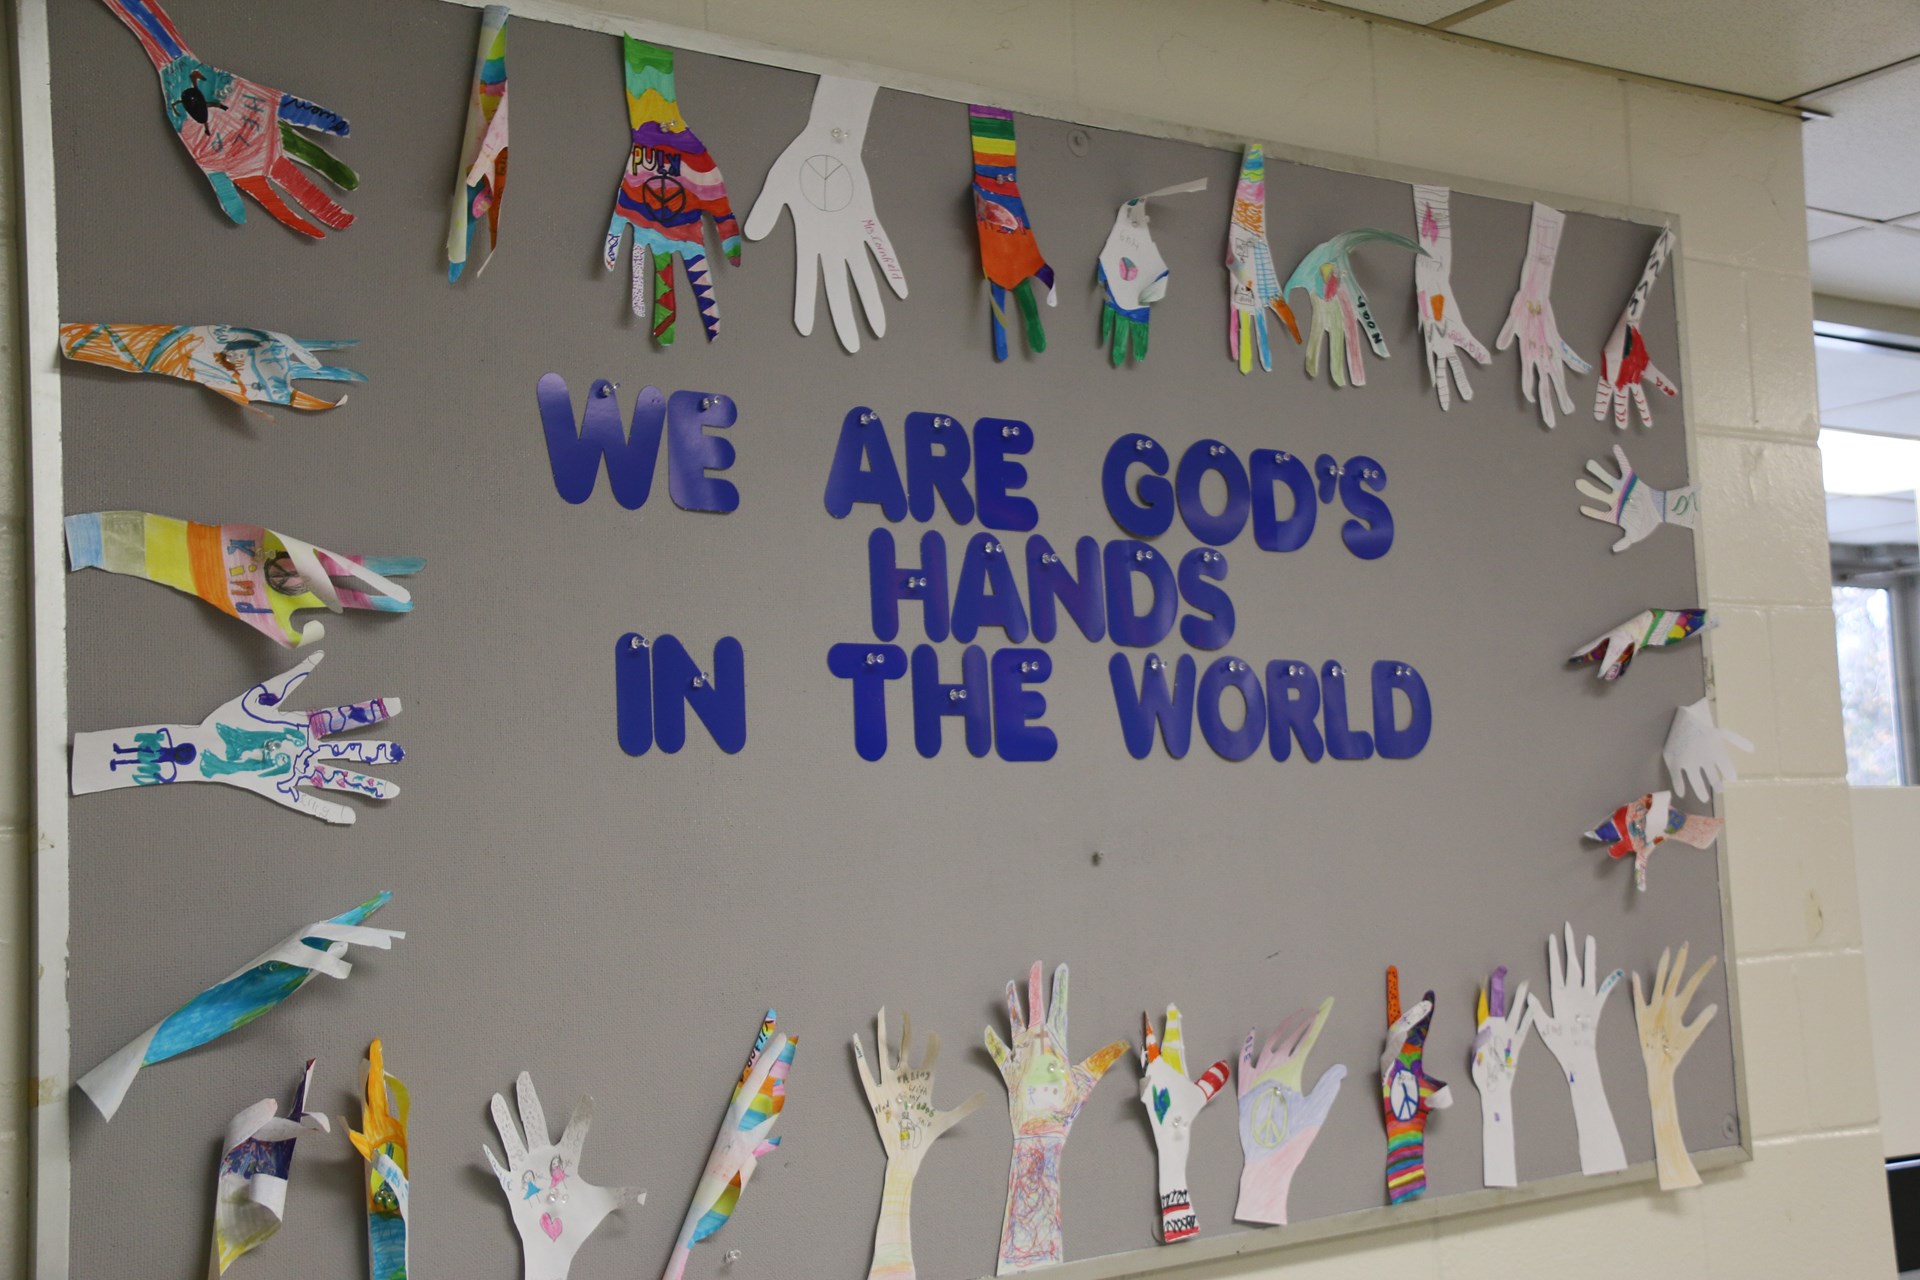 Bulletin Board with student artwork showing "We are God's Hands in the World"